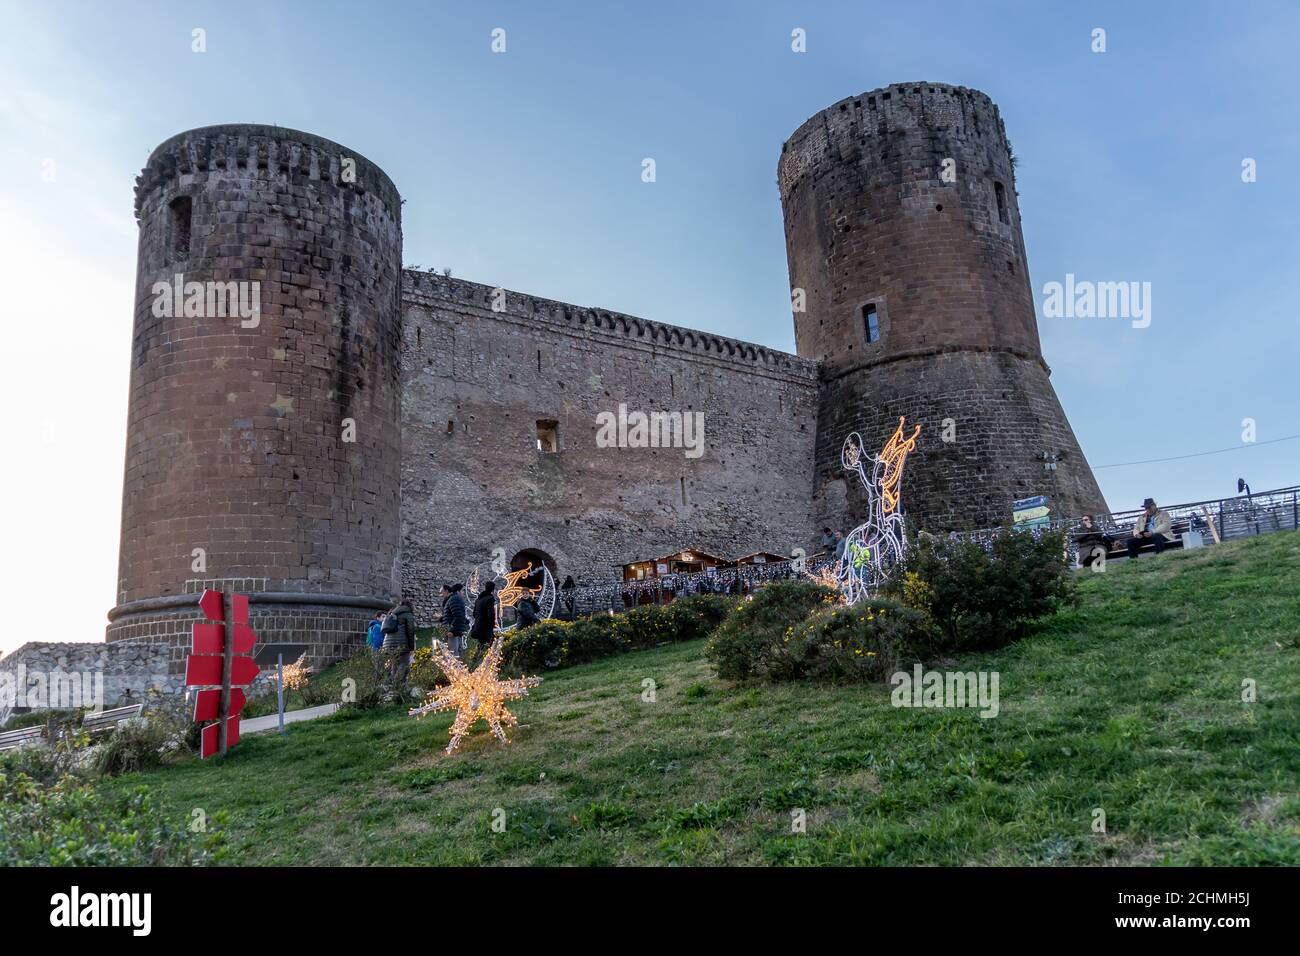 Lettere, Naples, Italy, December 2019: The Medieval Castle of Lettere during the Christmas time, with lights and Christmas markets. Stock Photo